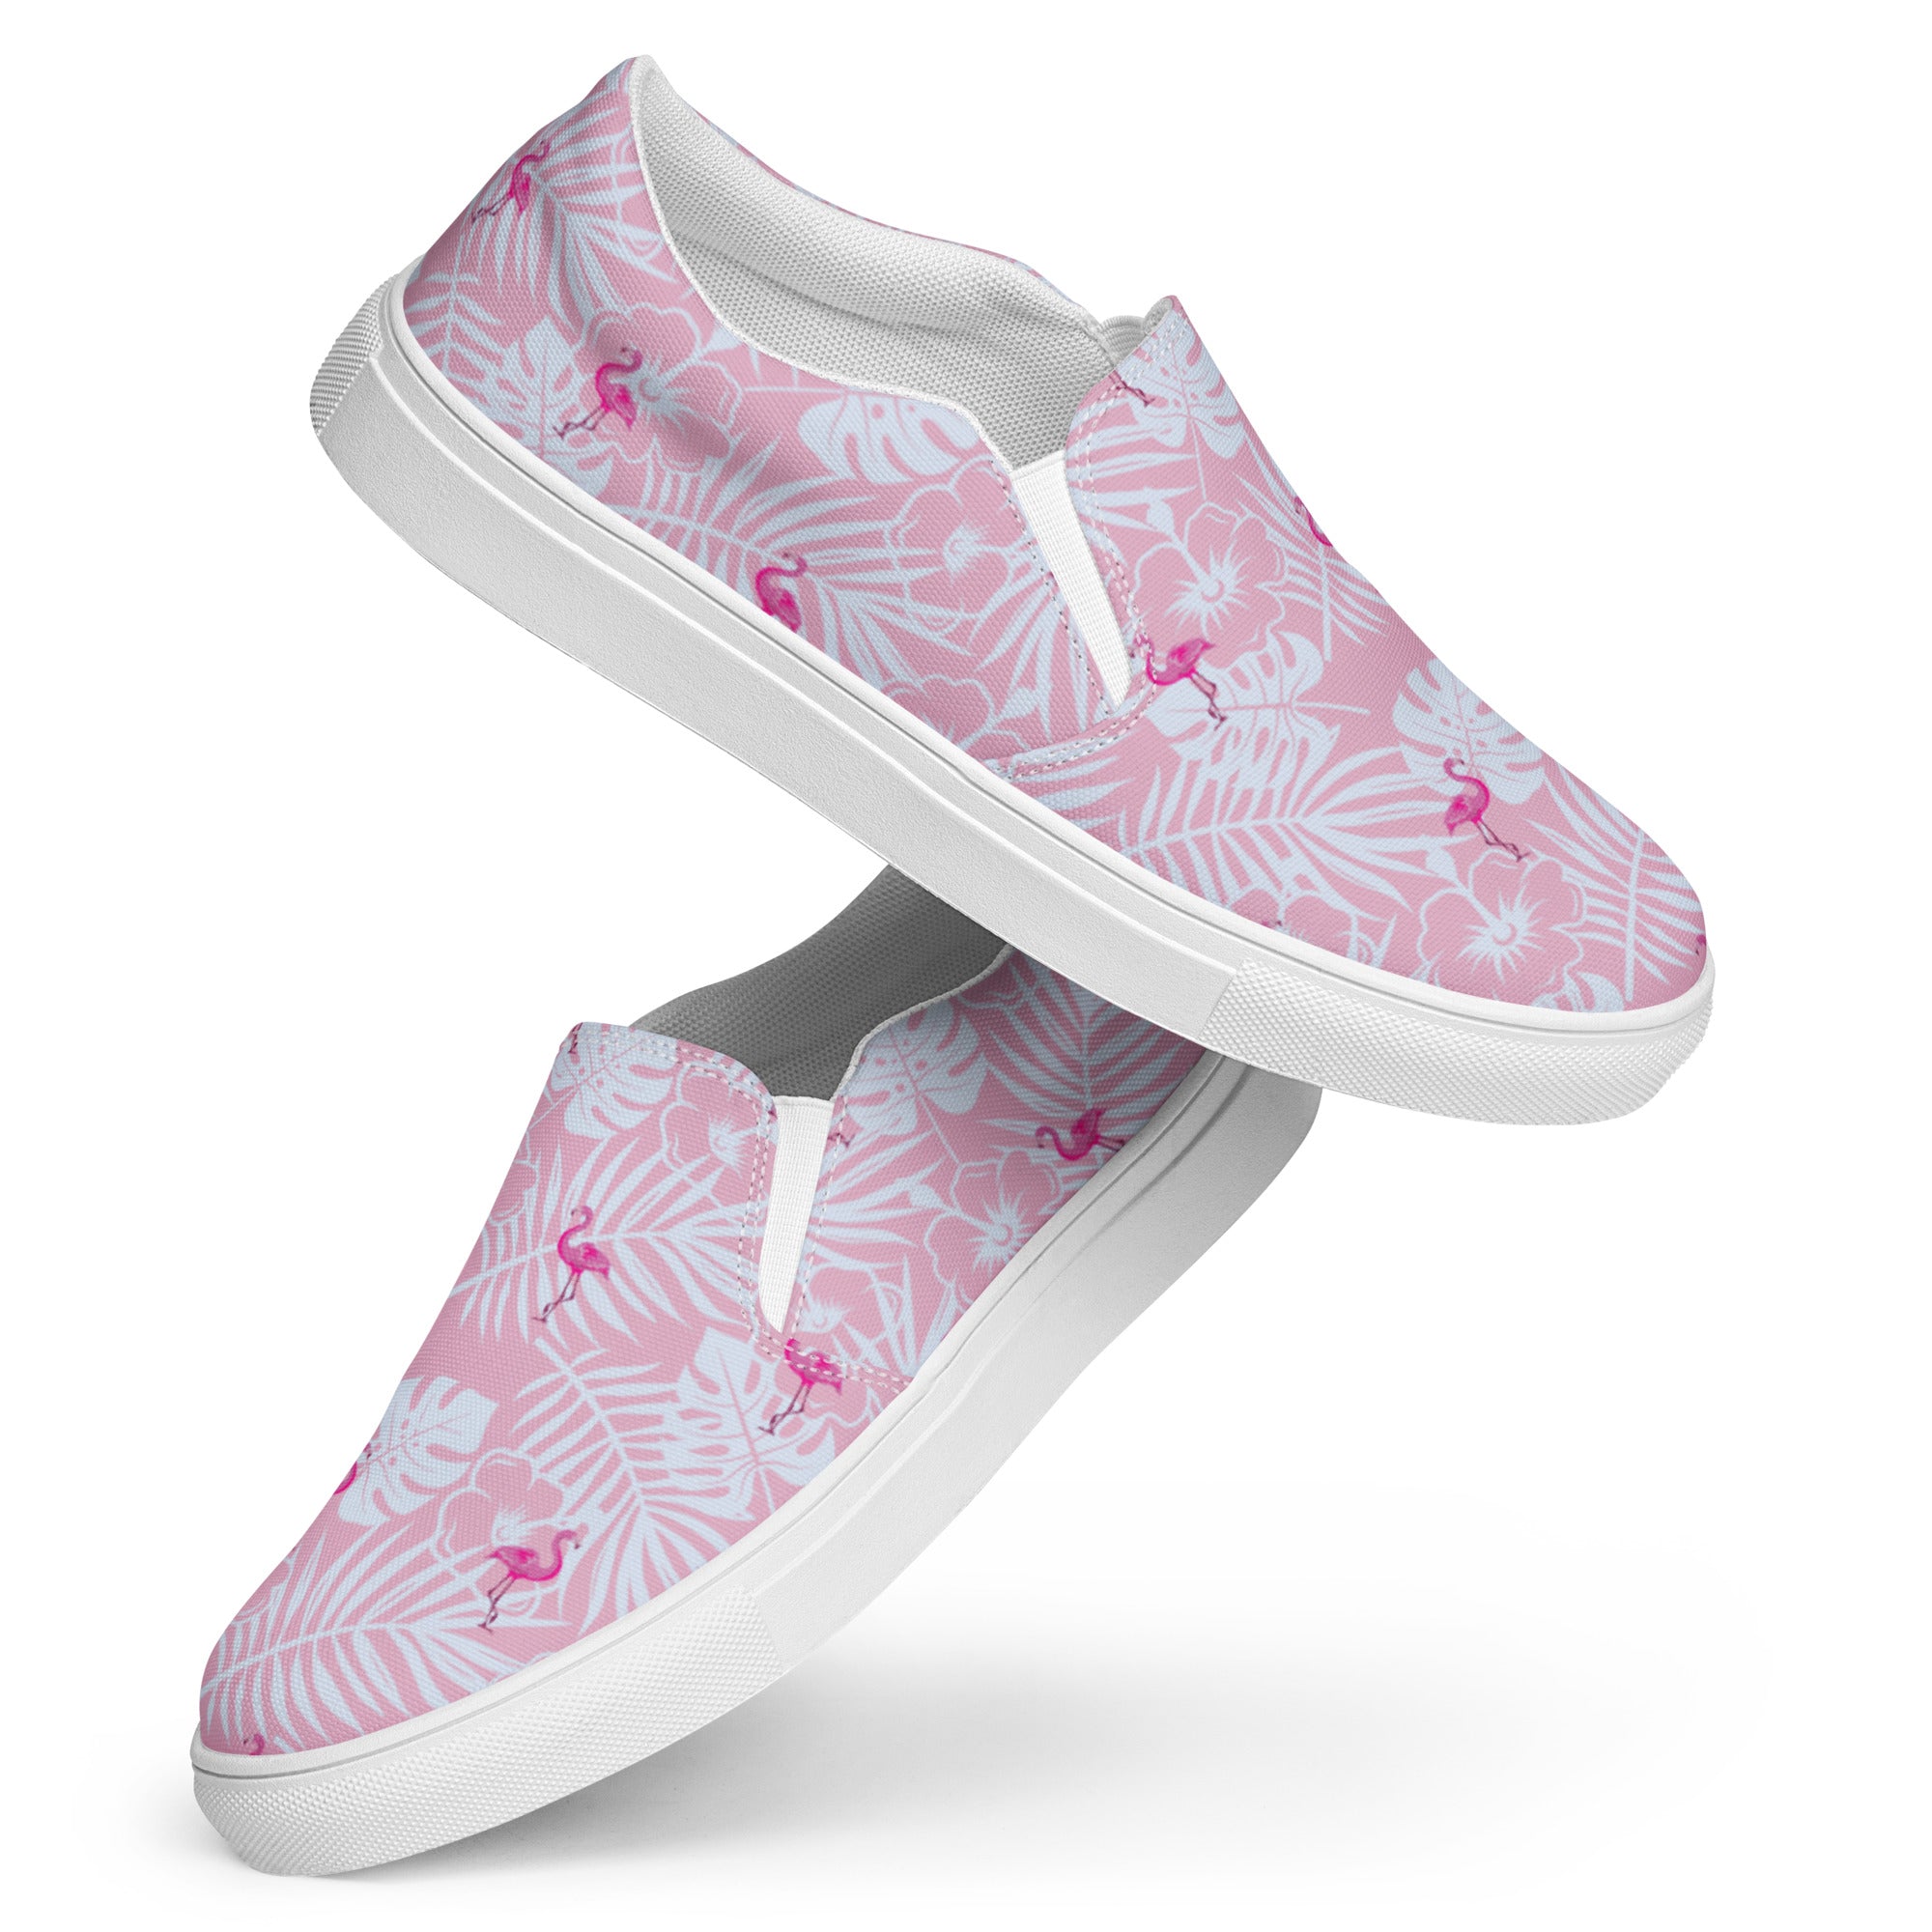 Rad Palm Party Like A Flockstar Pink Men’s Slip-On Canvas Shoes